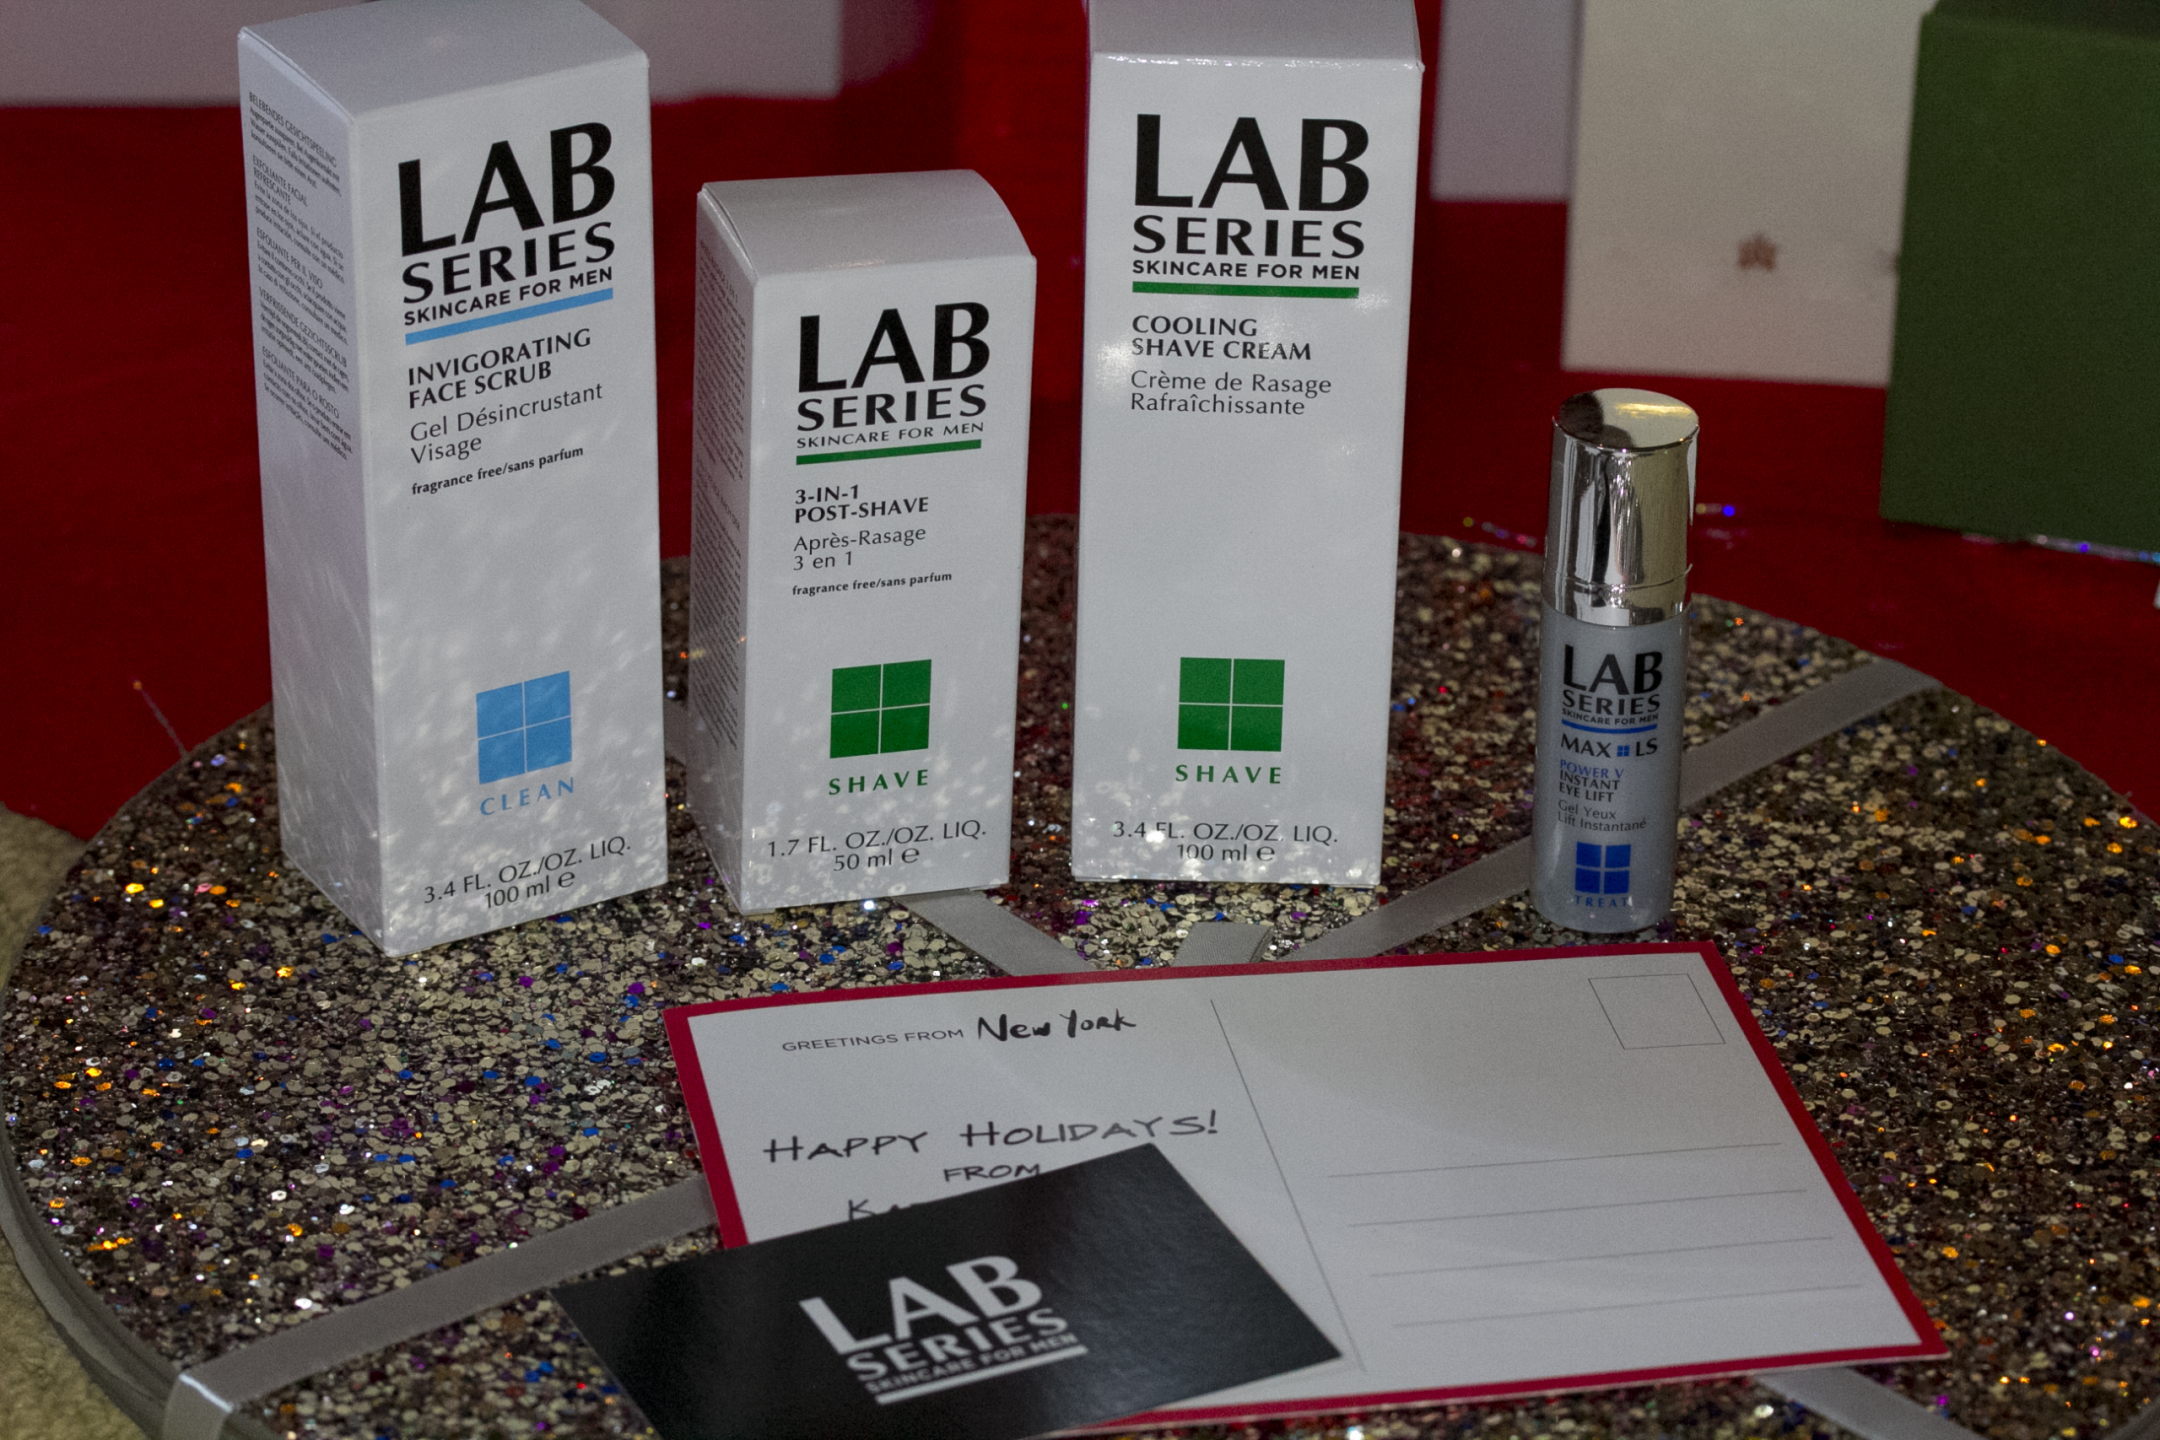 LAB Series skincare for men holiday gift guide favorites